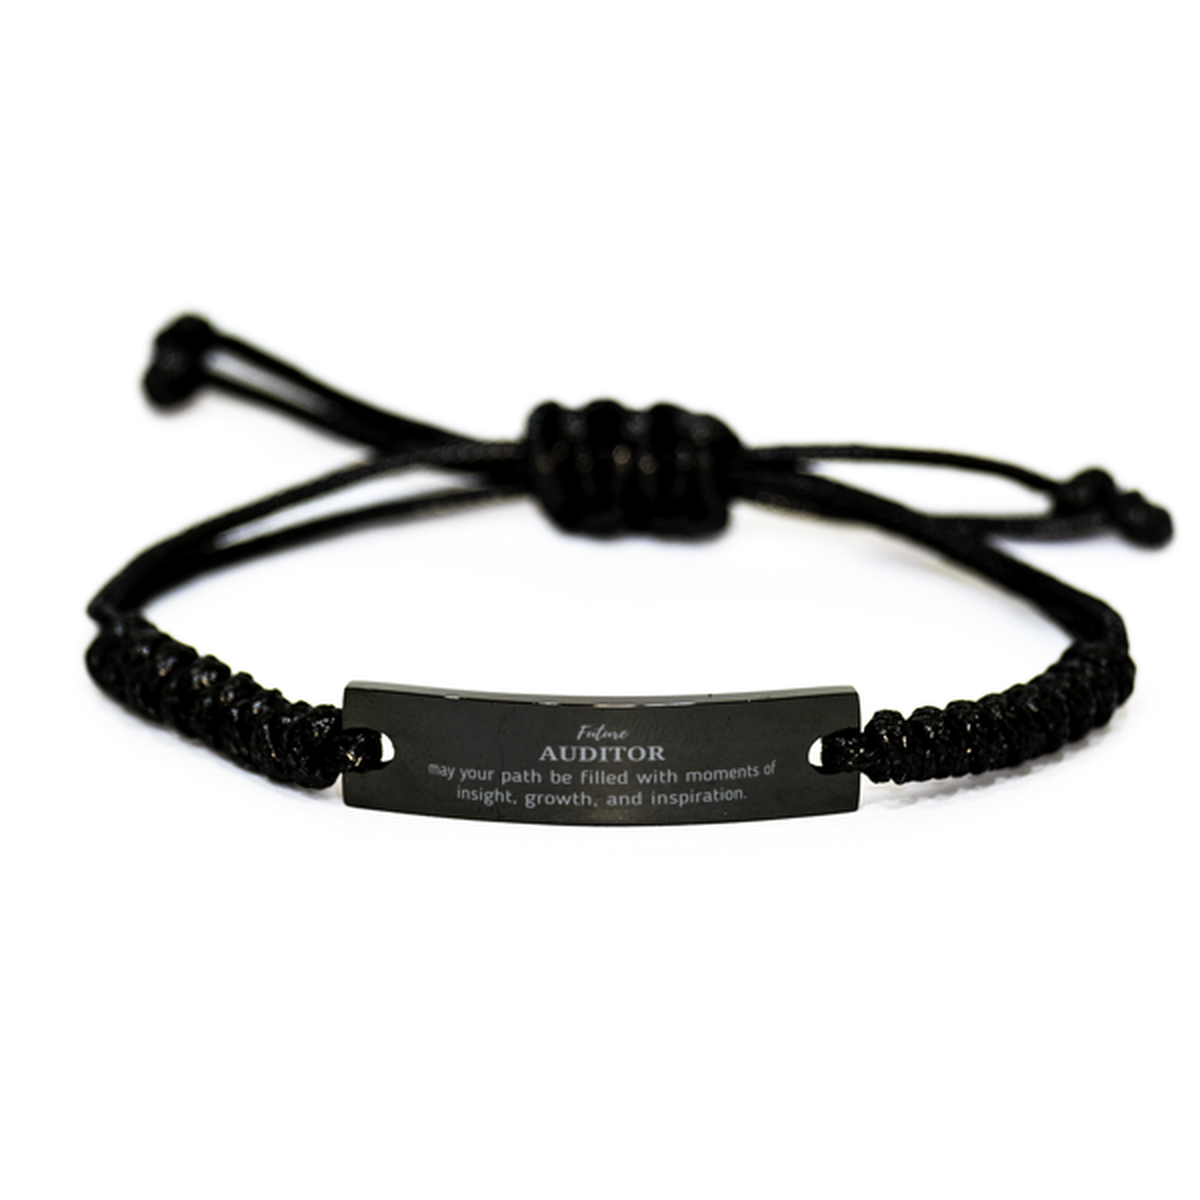 Future Auditor Gifts, May your path be filled with moments of insight, Graduation Gifts for New Auditor, Christmas Unique Black Rope Bracelet For Men, Women, Friends